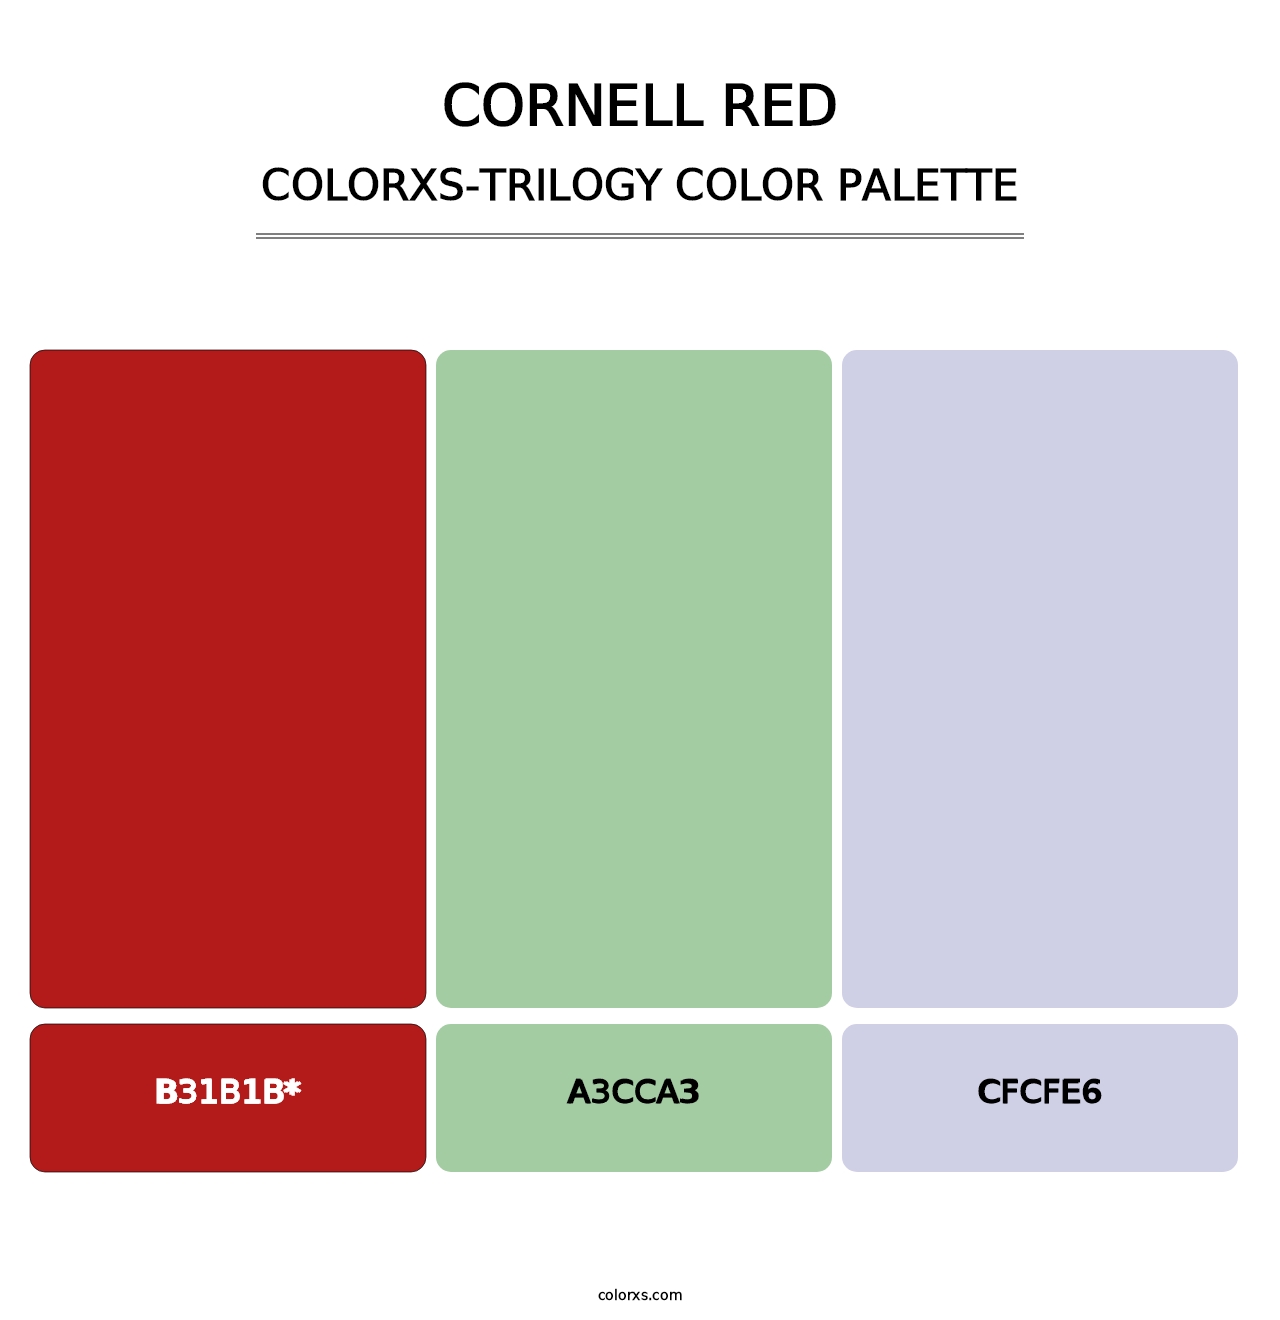 Cornell Red - Colorxs Trilogy Palette